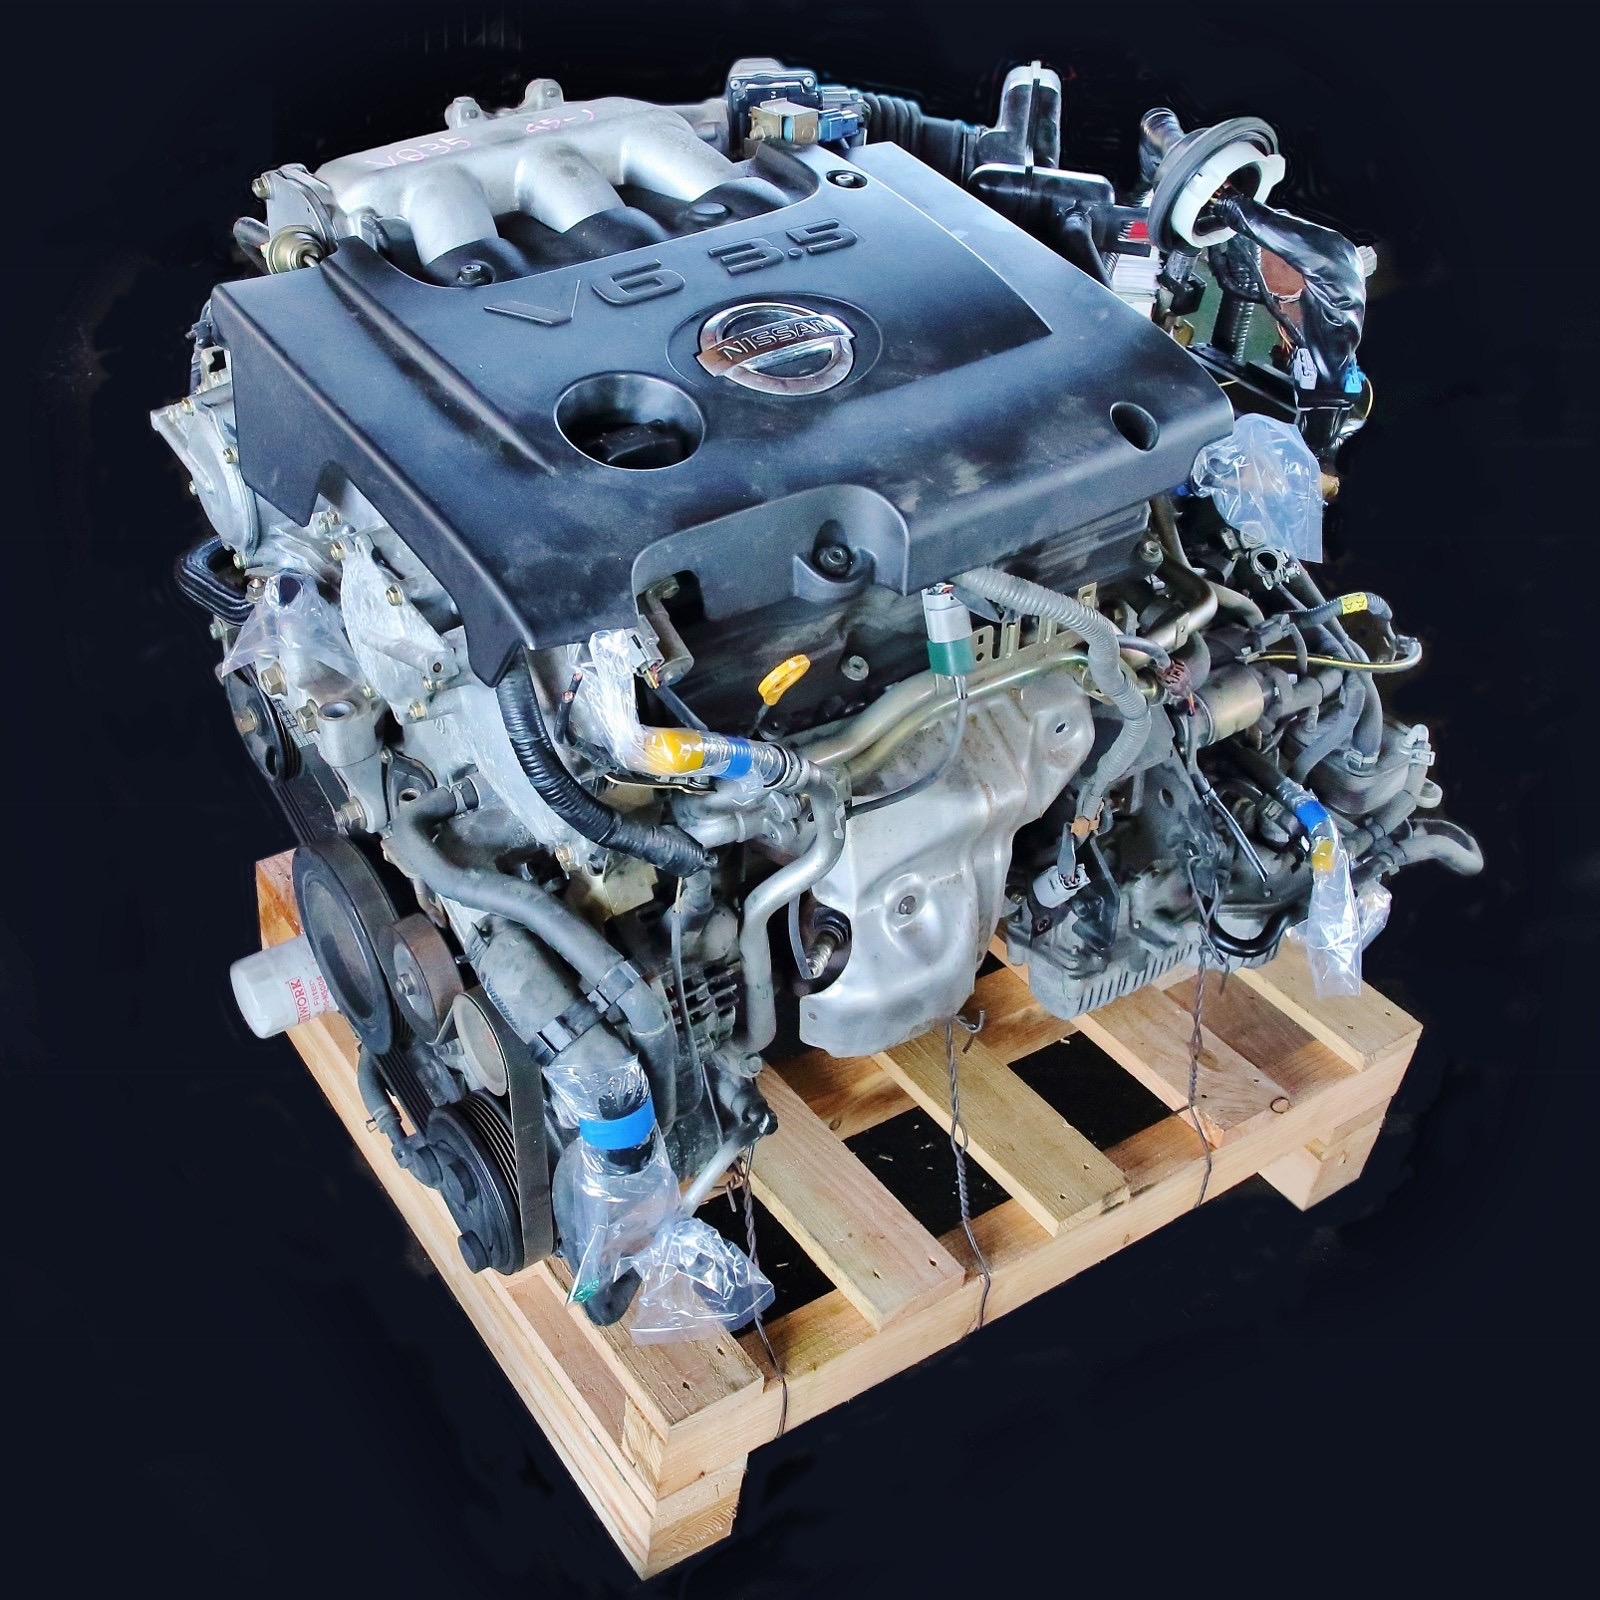 
The Advantages of Buying Used Engines and Transmissions from Central Auto Parts in Colorado Springs